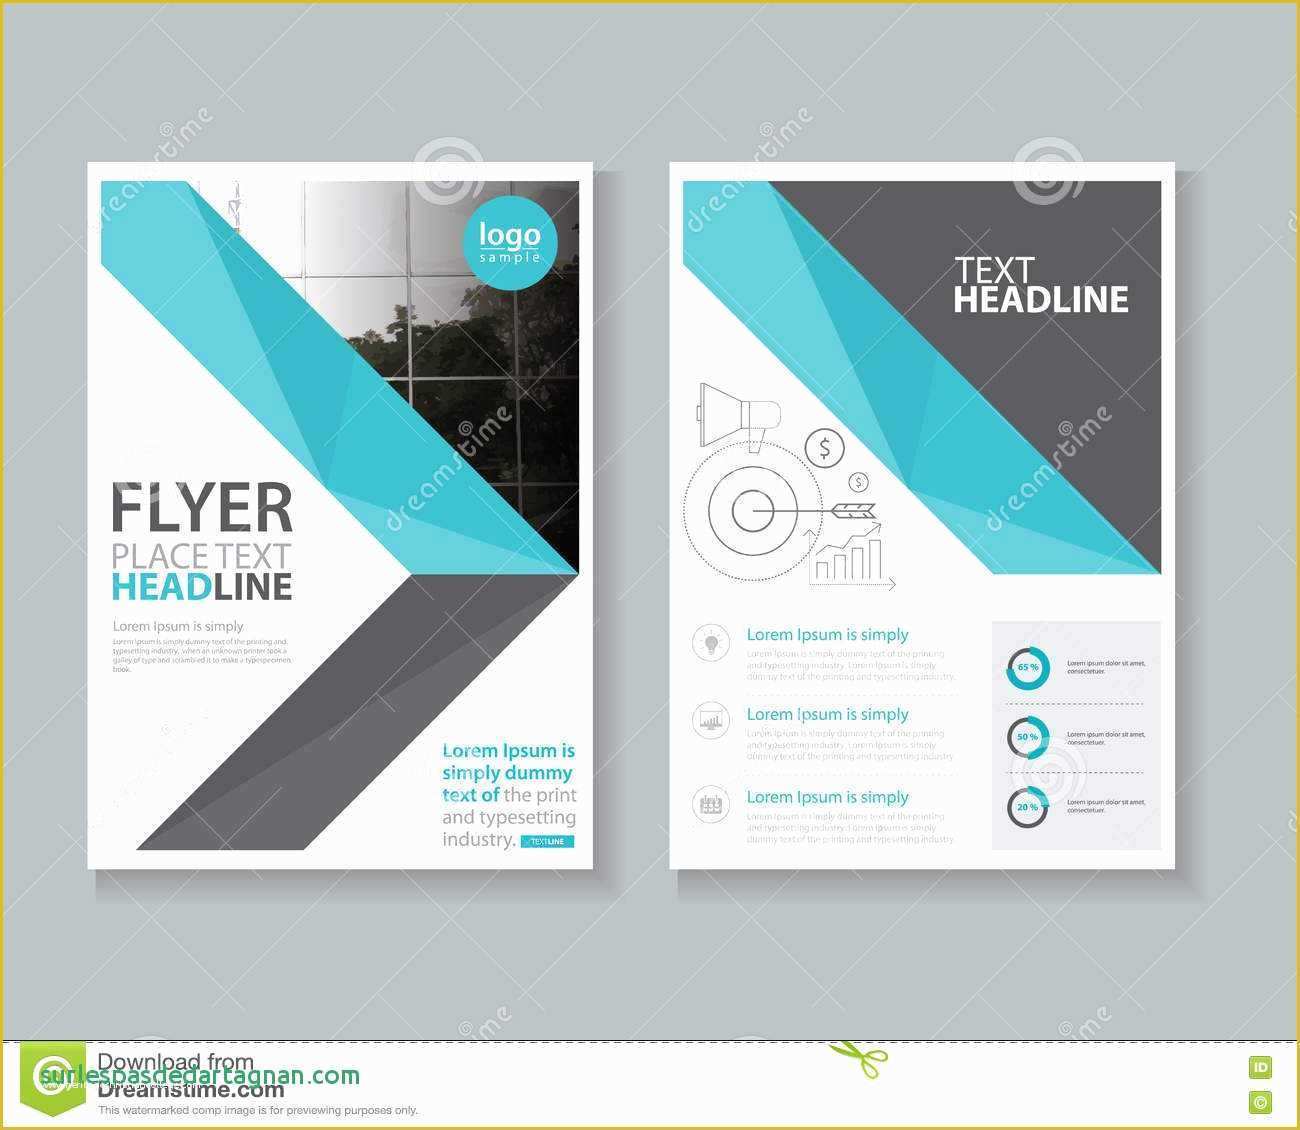 Report Cover Page Template Microsoft Word Free Download Of Cover Page Layout Design Maths Equinetherapies Elegant